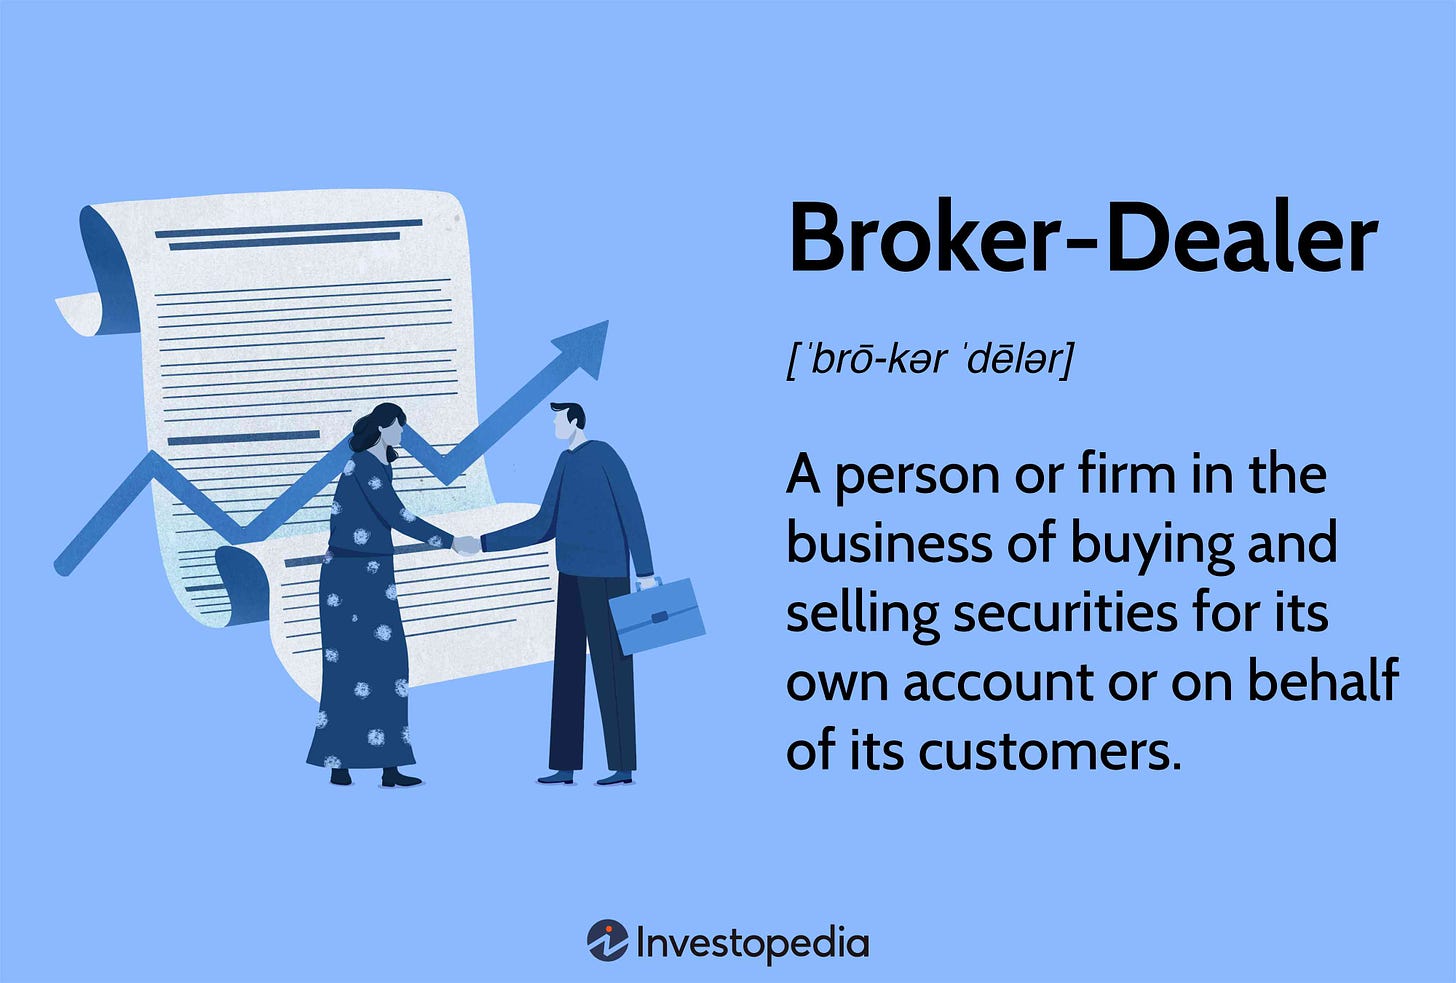 What Is a Broker-Dealer (B-D), and How Does It Work?